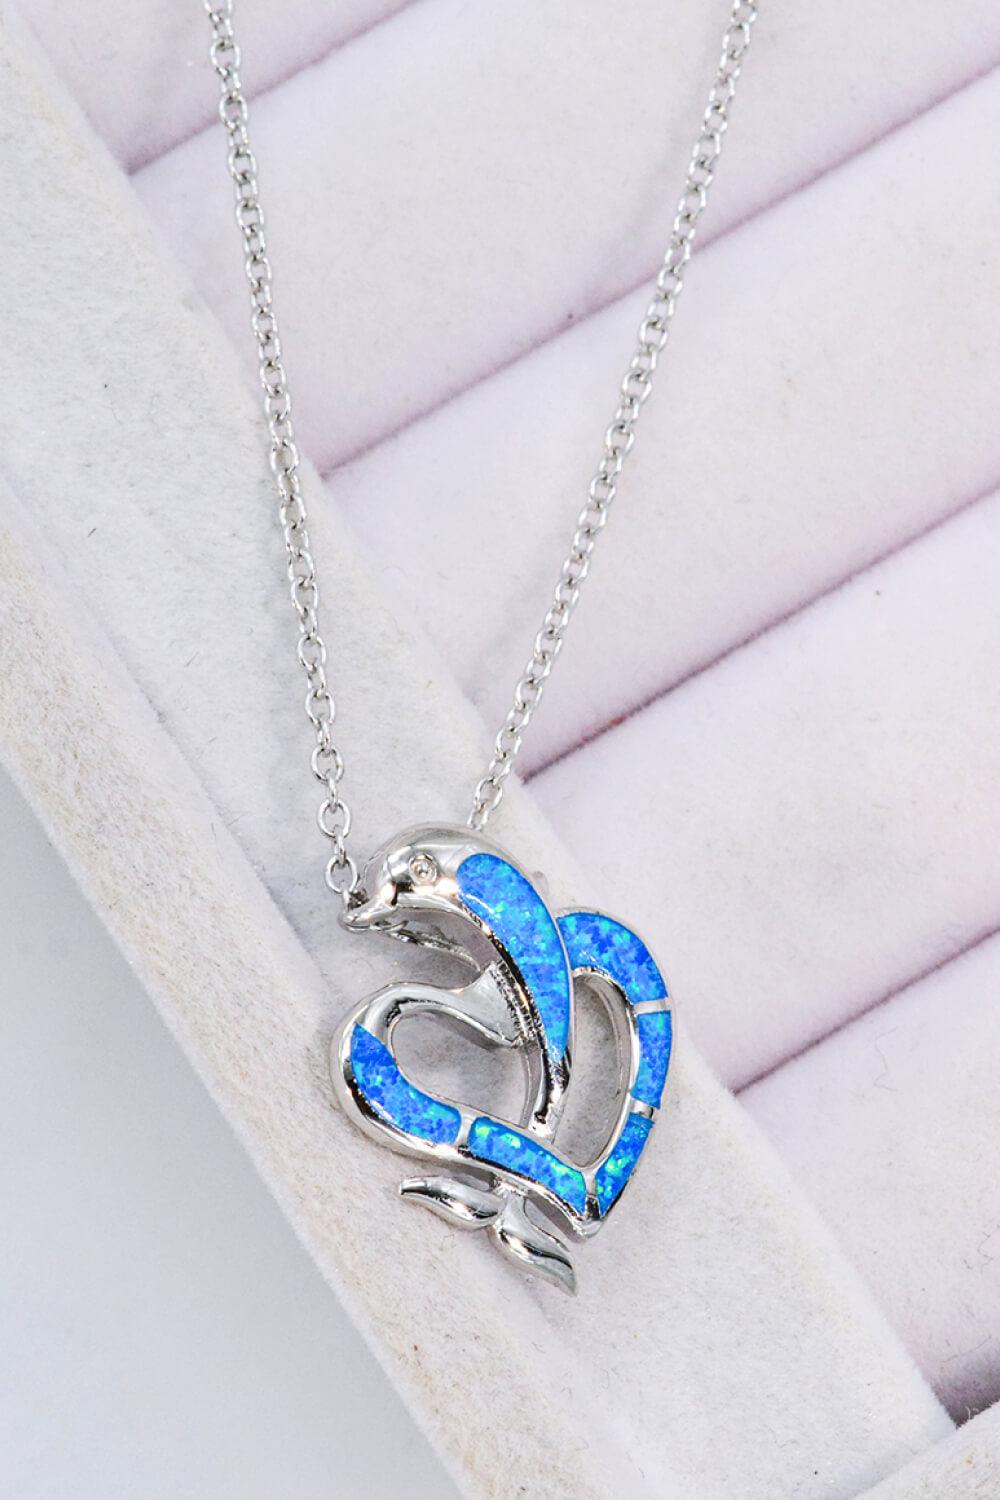 Opal Dolphin Heart Chain-Link Necklace - Flyclothing LLC